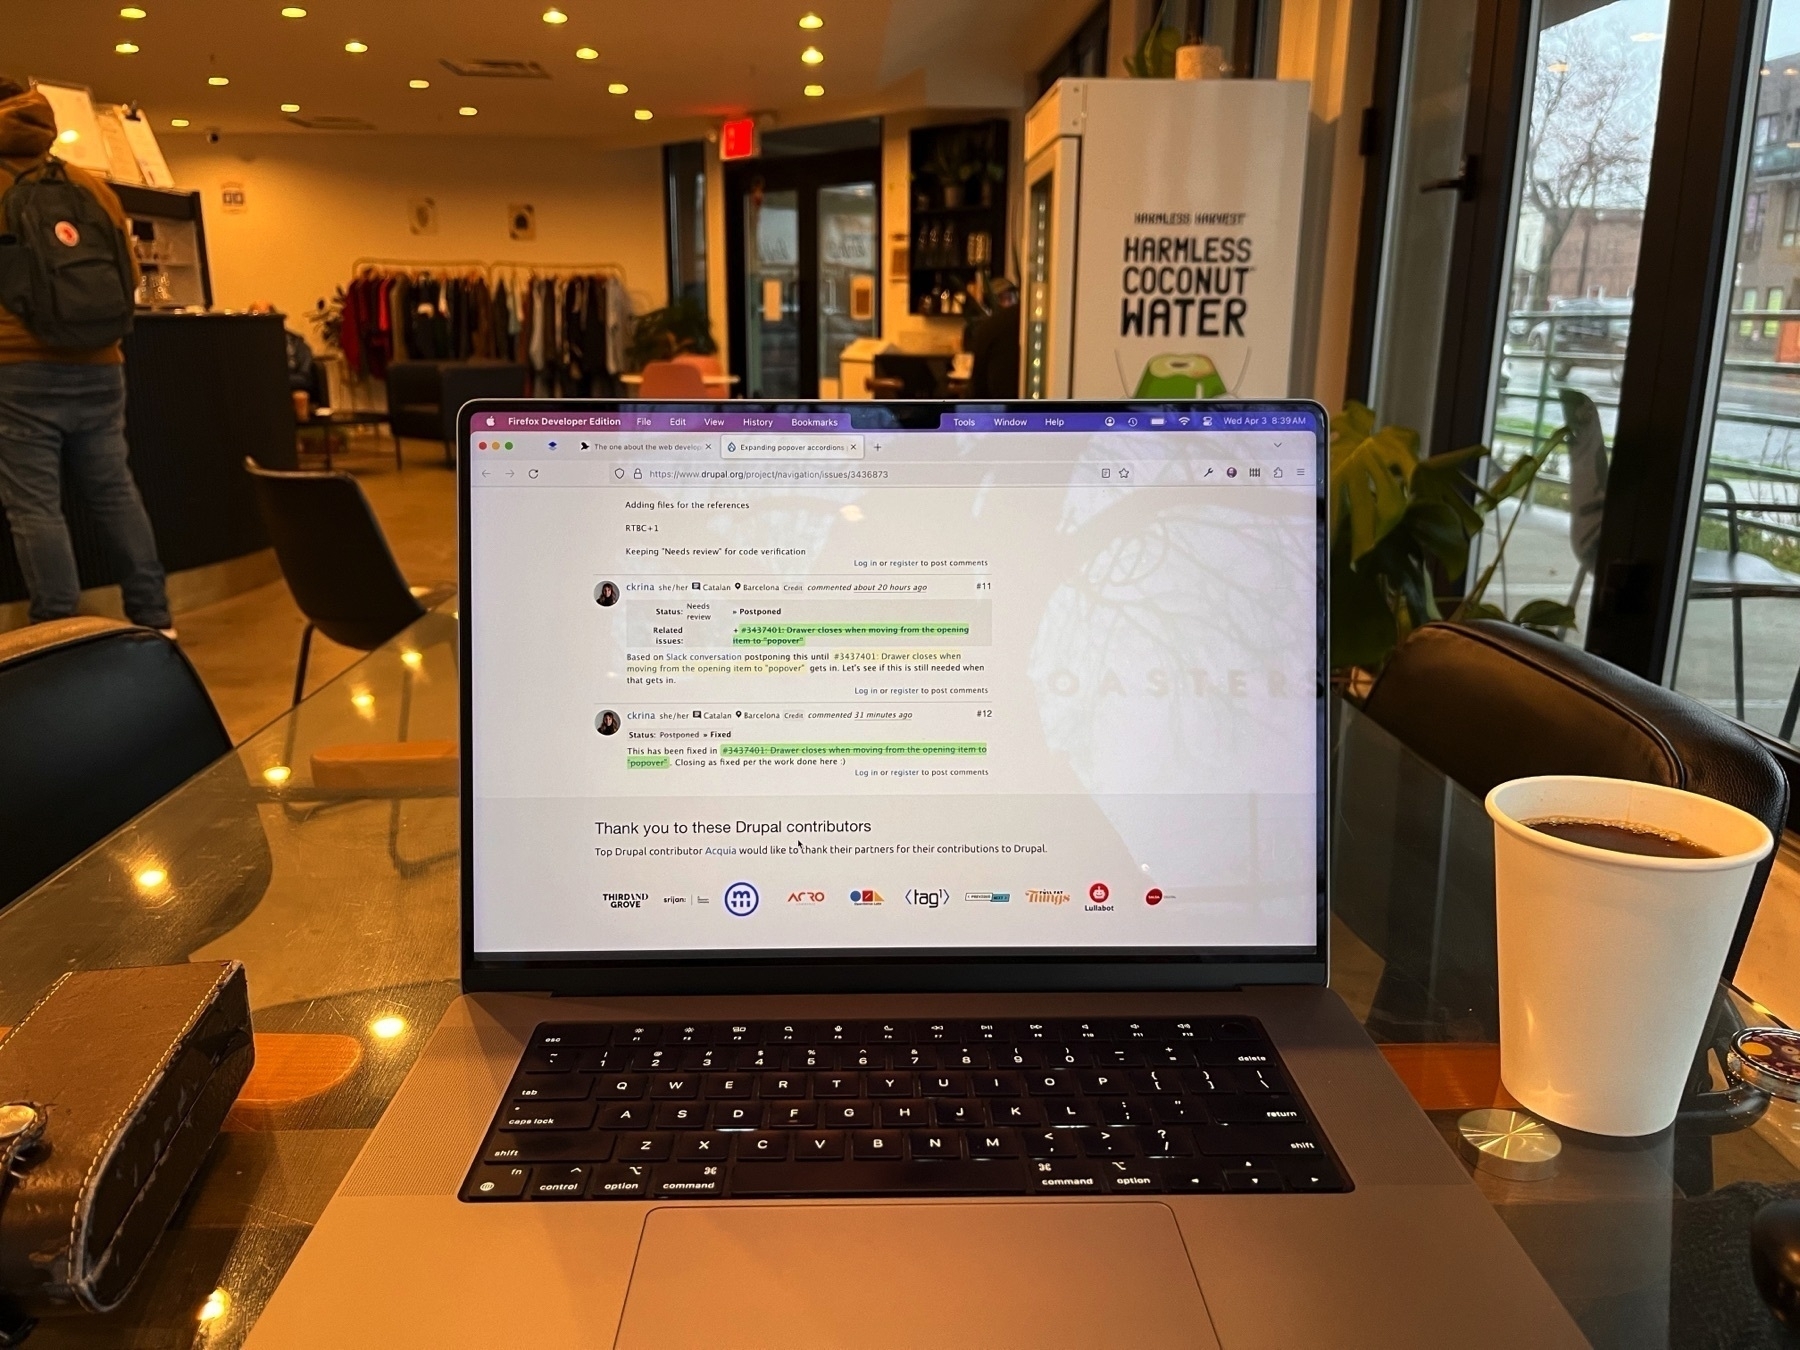 An open laptop on a glass table showing a Drupal navigation module ticket. There’s a hot coffee in a paper cup sitting next to it, and plants and coffee shop stuff in the background. There’s a fridge with “Harmless Coconut Water” branding on the side.